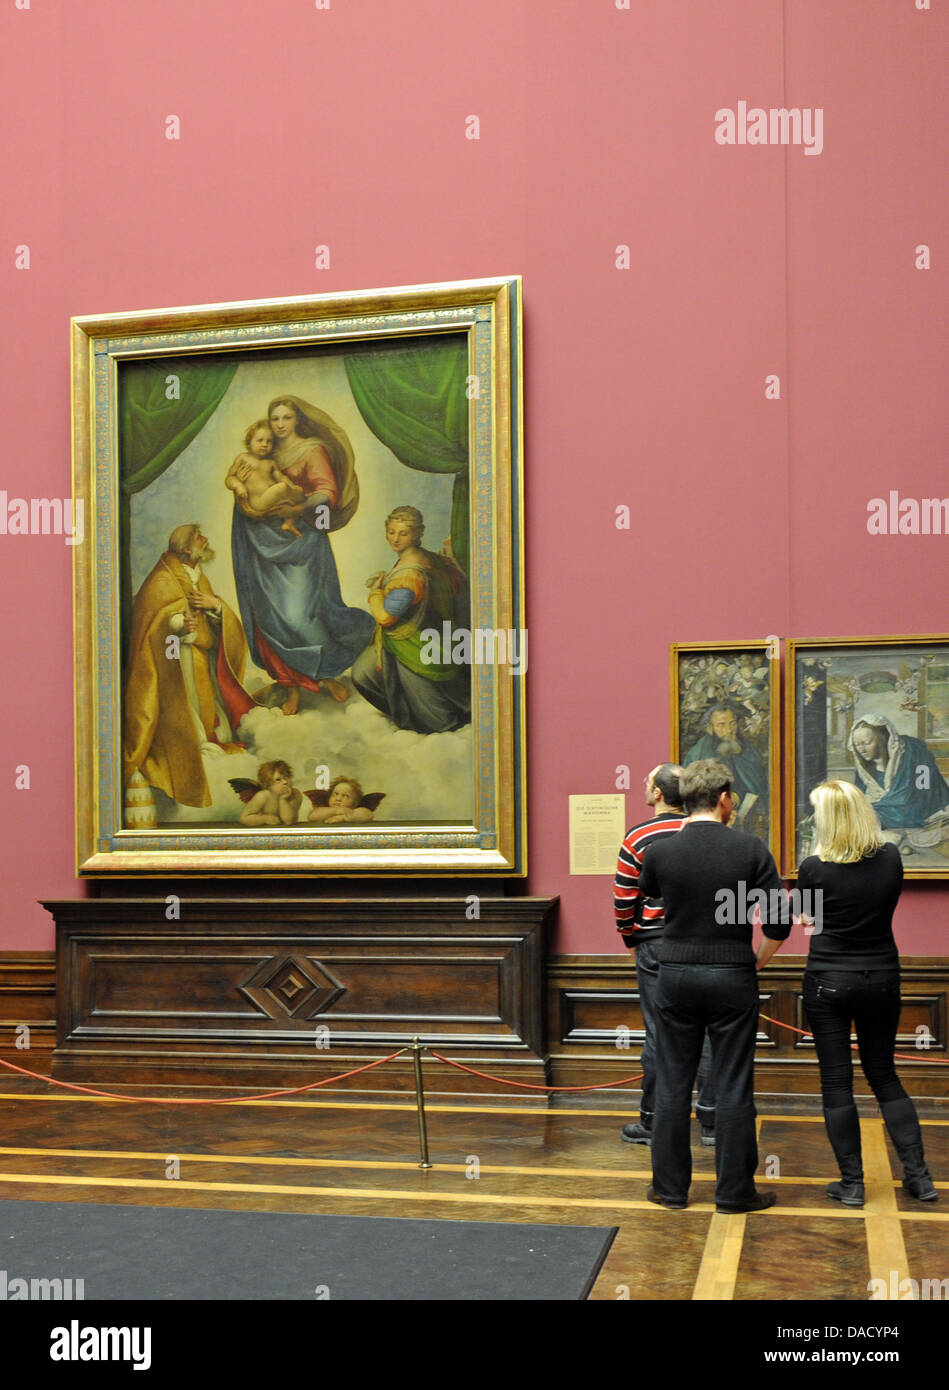 Visitors look at the Sistine Madonna by Raphael at the Gemaeldegalerie in Dresden, Germany, 22 December 2011. Dresden's most famous painting will be 500 years old in 2012. Photo: MATTHIAS HIEKEL Stock Photo